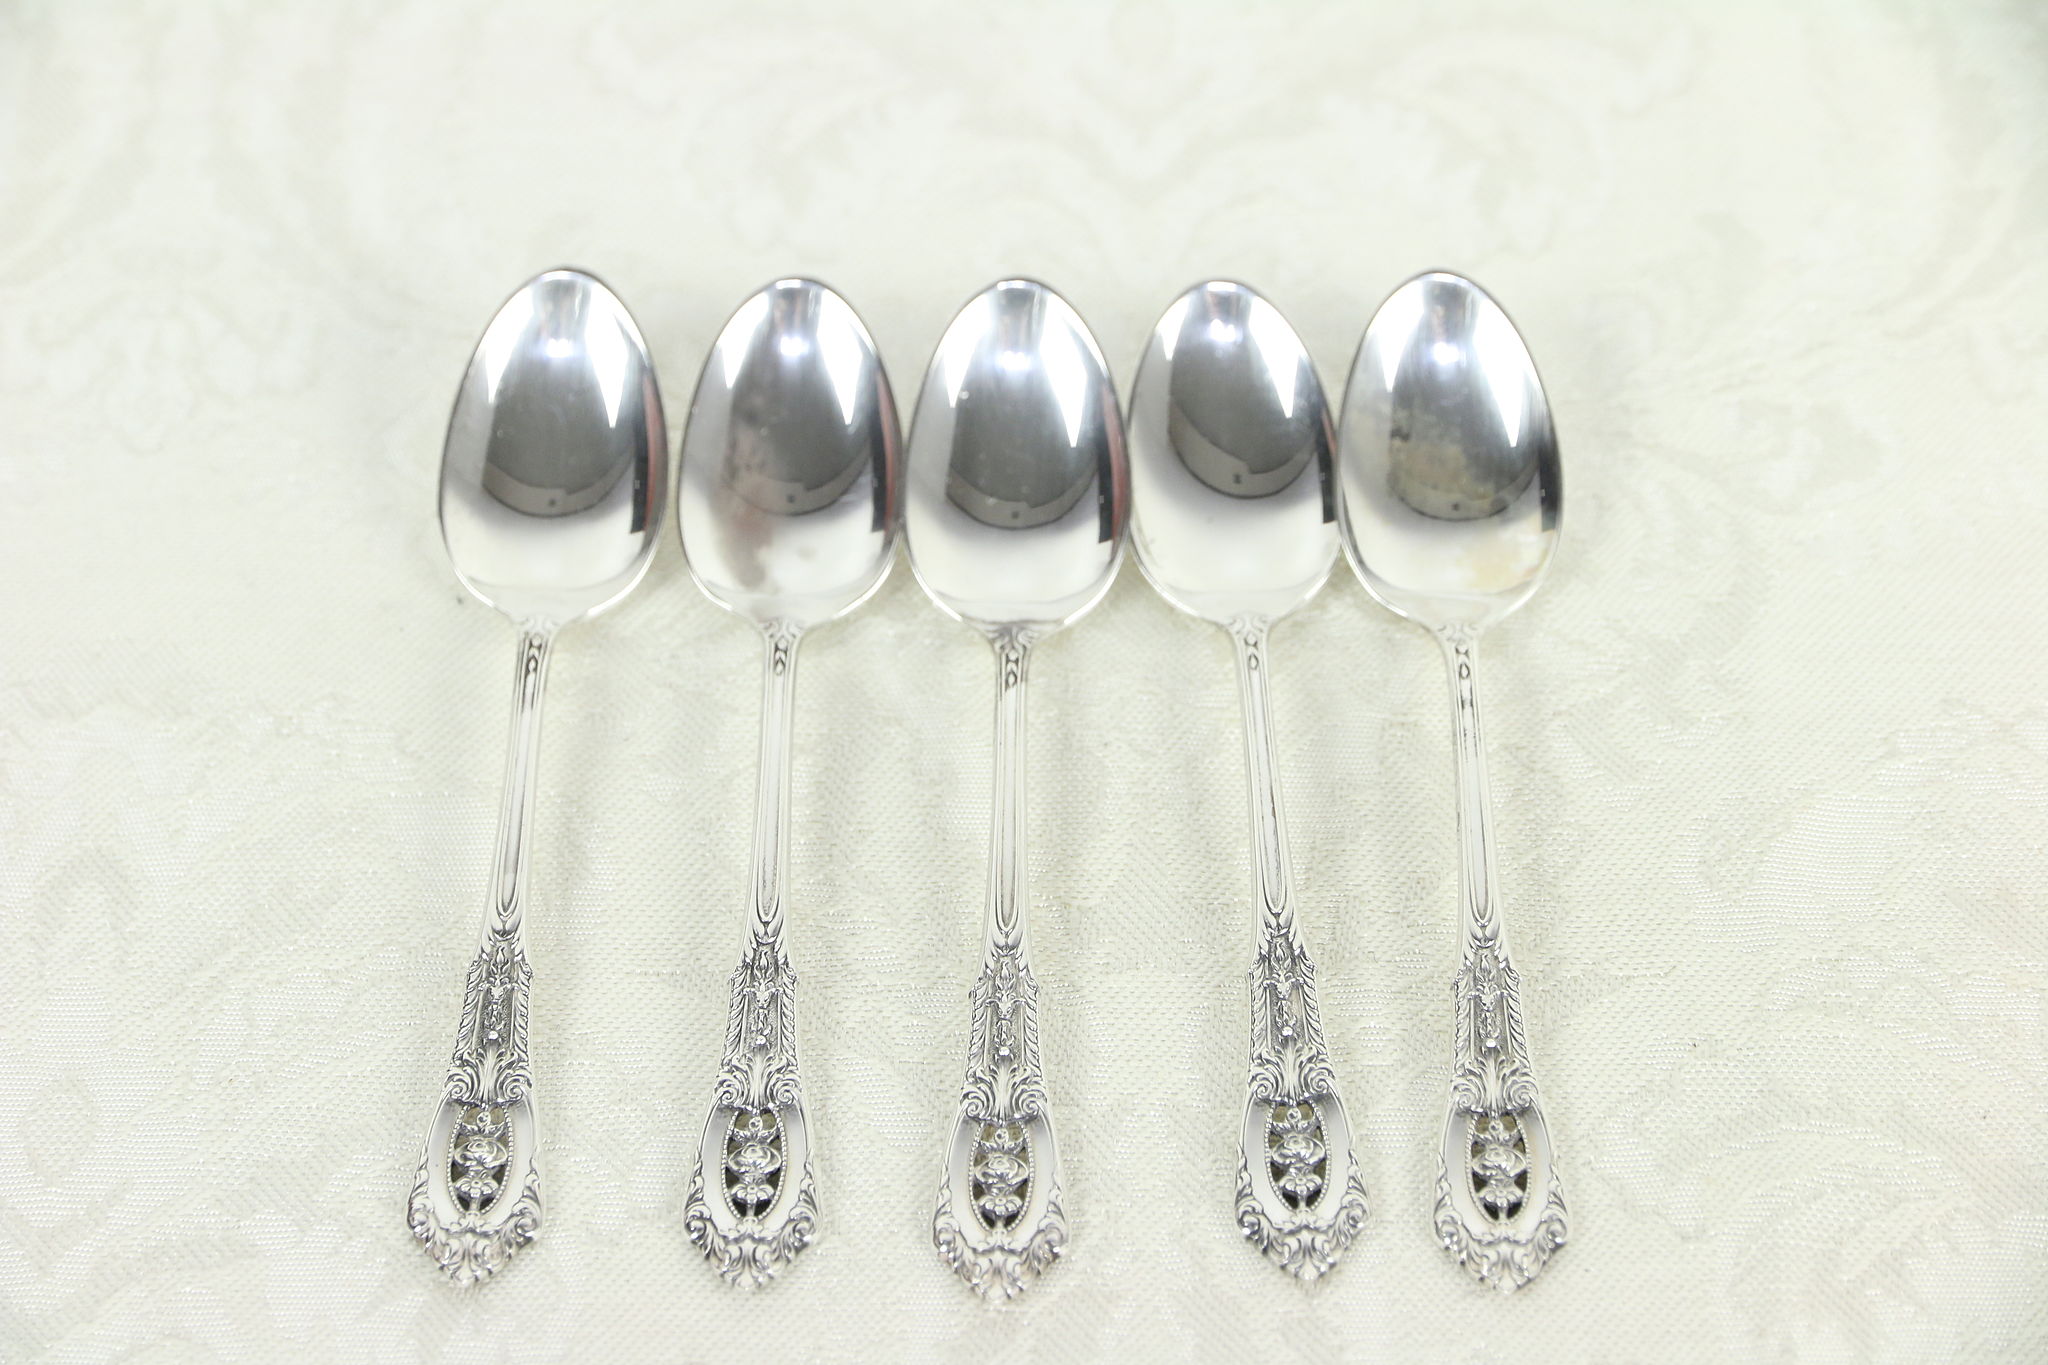 Rose By Wallace Sterling Silver Demitasse Spoon 4 1/4" 